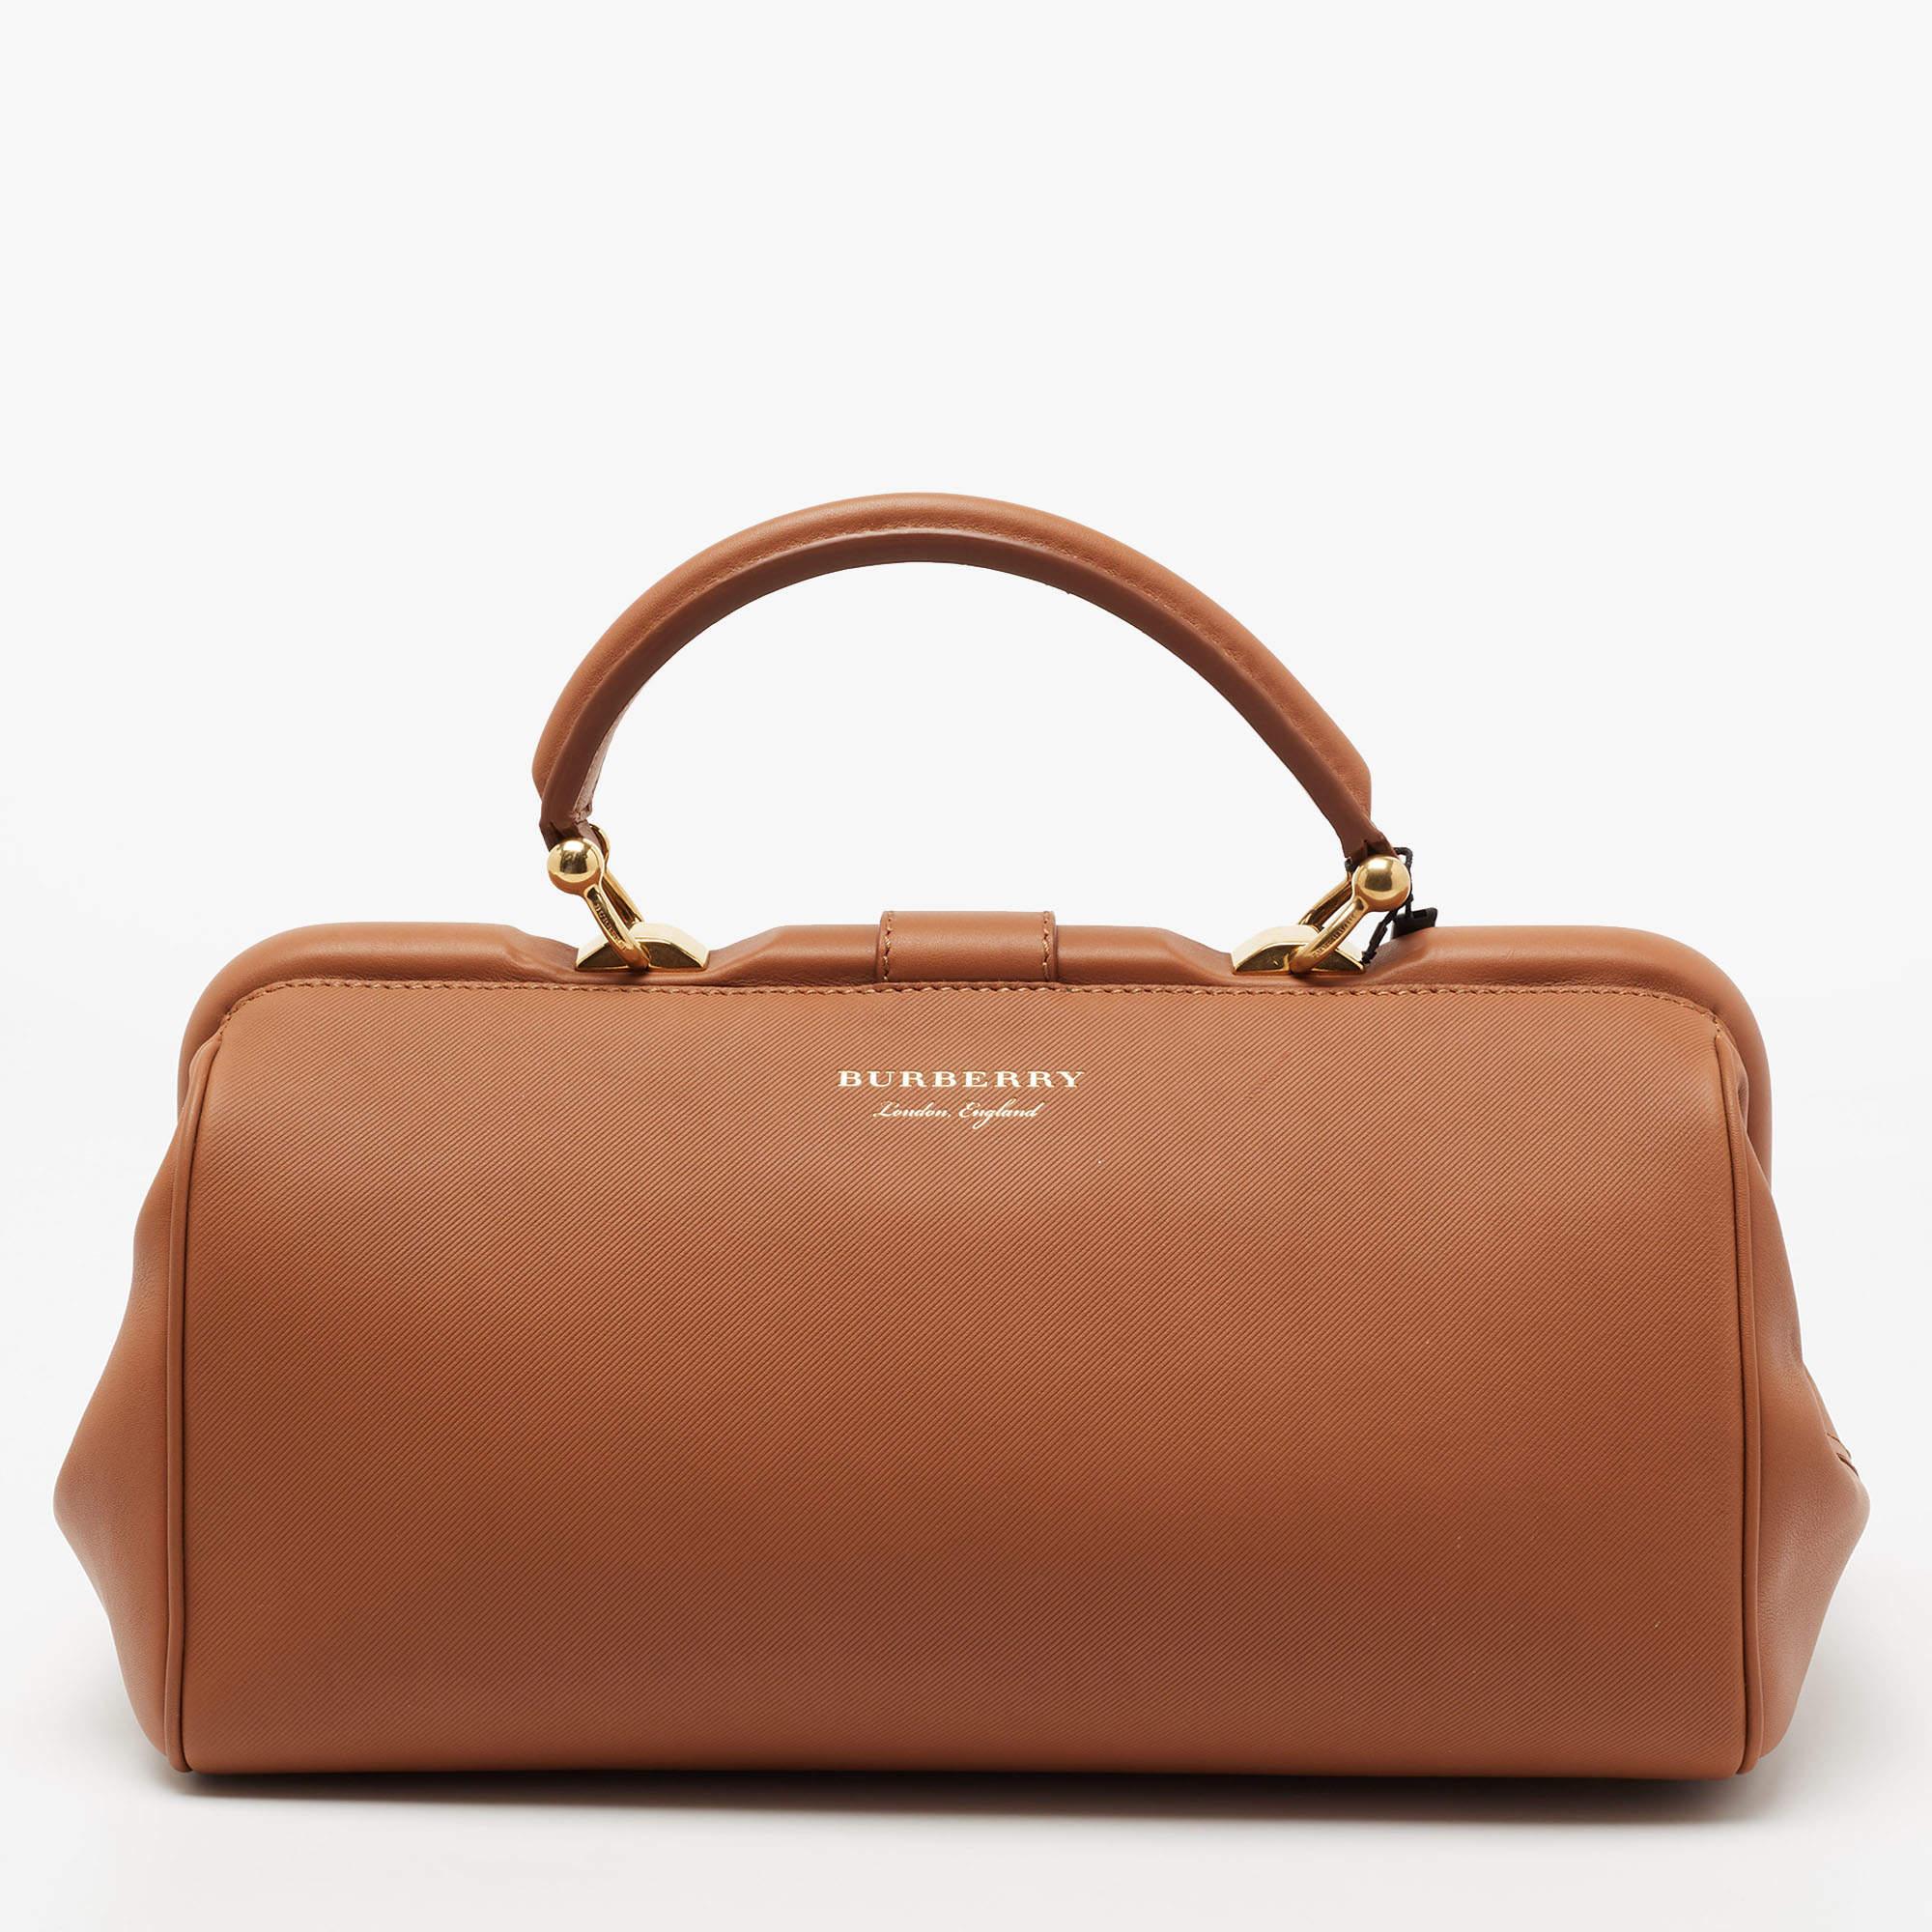 A revolutionary name in fashion, Burberry is defined by class and innovation. The minimal silhouette of this Bowling bag adds to its timeless appeal, and the striking branded lock closure on the front elevates the design. Lined with Alcantara, it